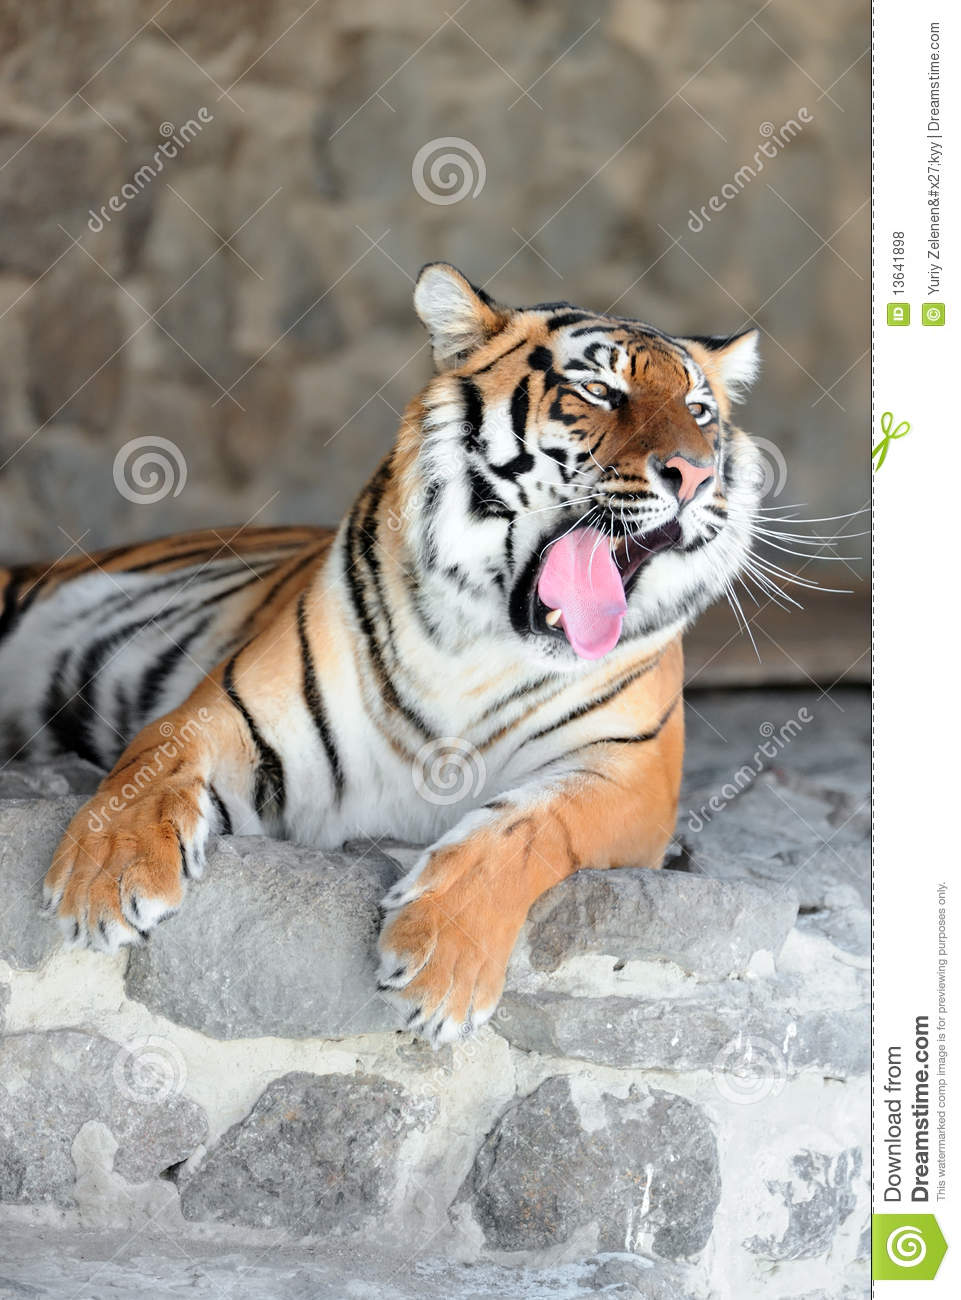 Tiger With Bared Fangs Royalty Free Stock Photos   Image  13641898